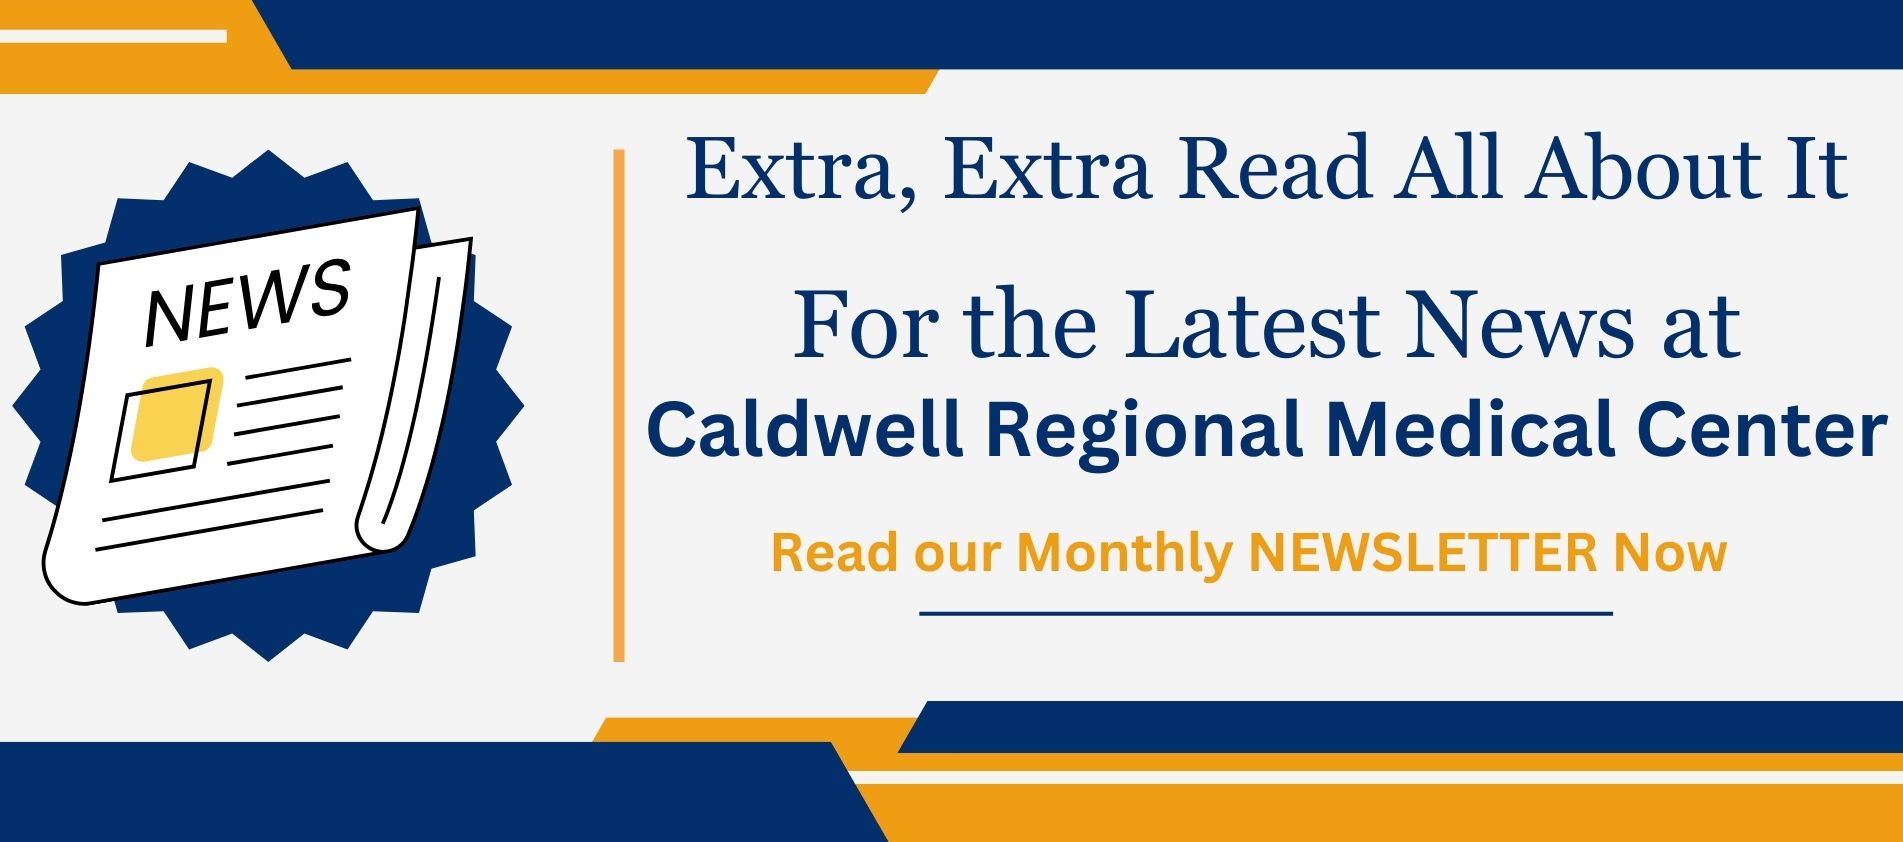 Extra, Extra, Read All About It

For the Latest News at Caldwell Regional Medical Center

Read our monthly NEWSLETTER Now!